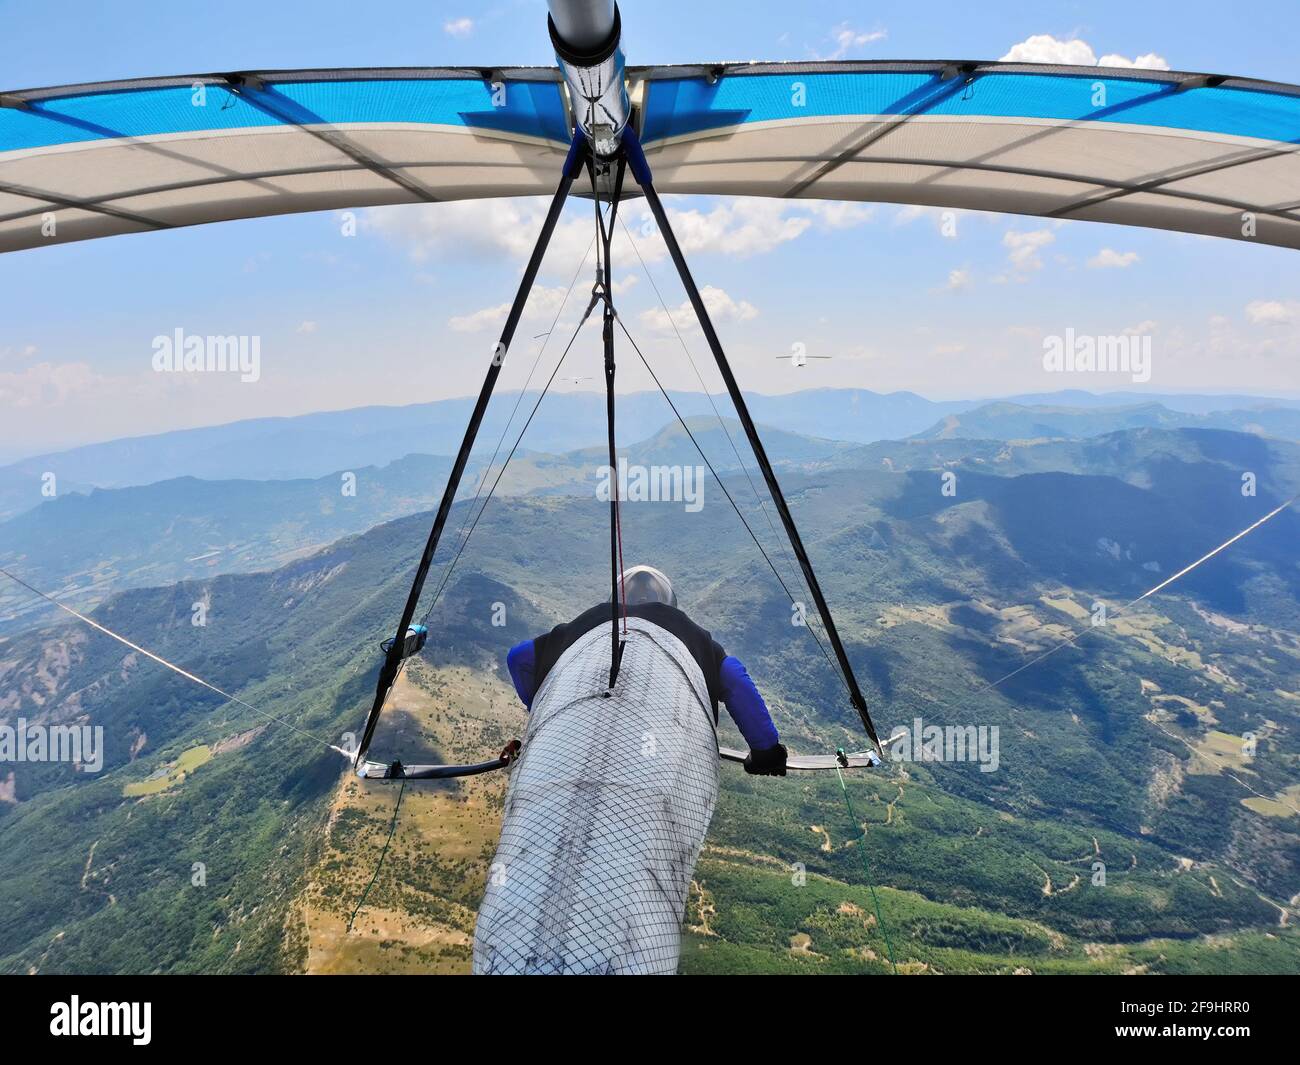 Hang glider pilots race on high altitude above mountain ridges. Extreme sports Stock Photo